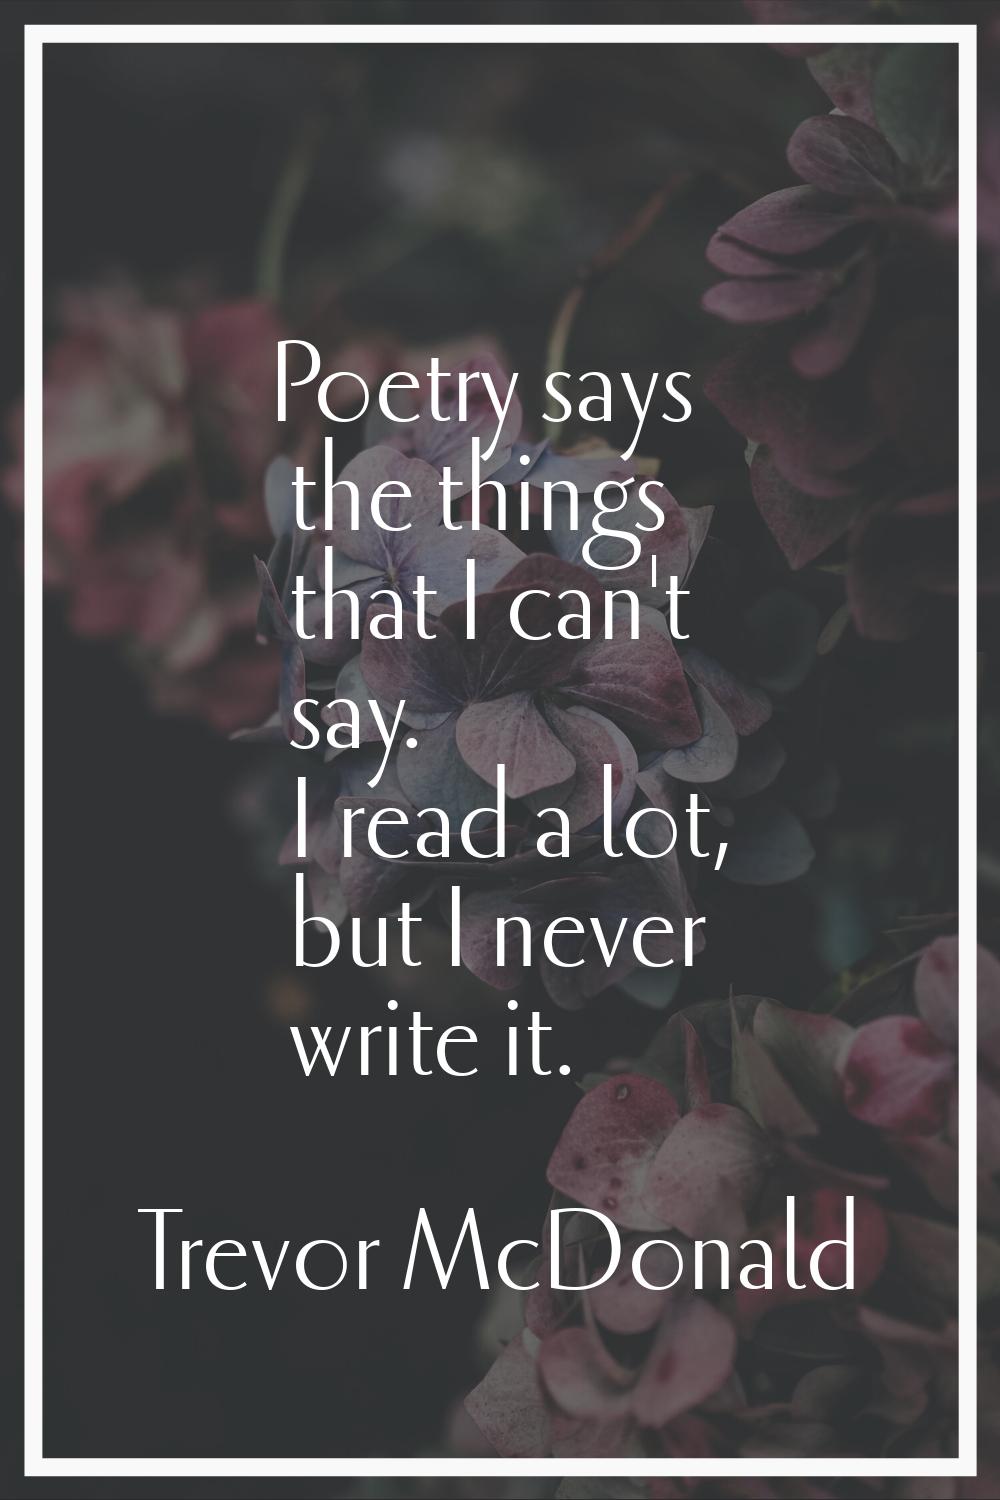 Poetry says the things that I can't say. I read a lot, but I never write it.